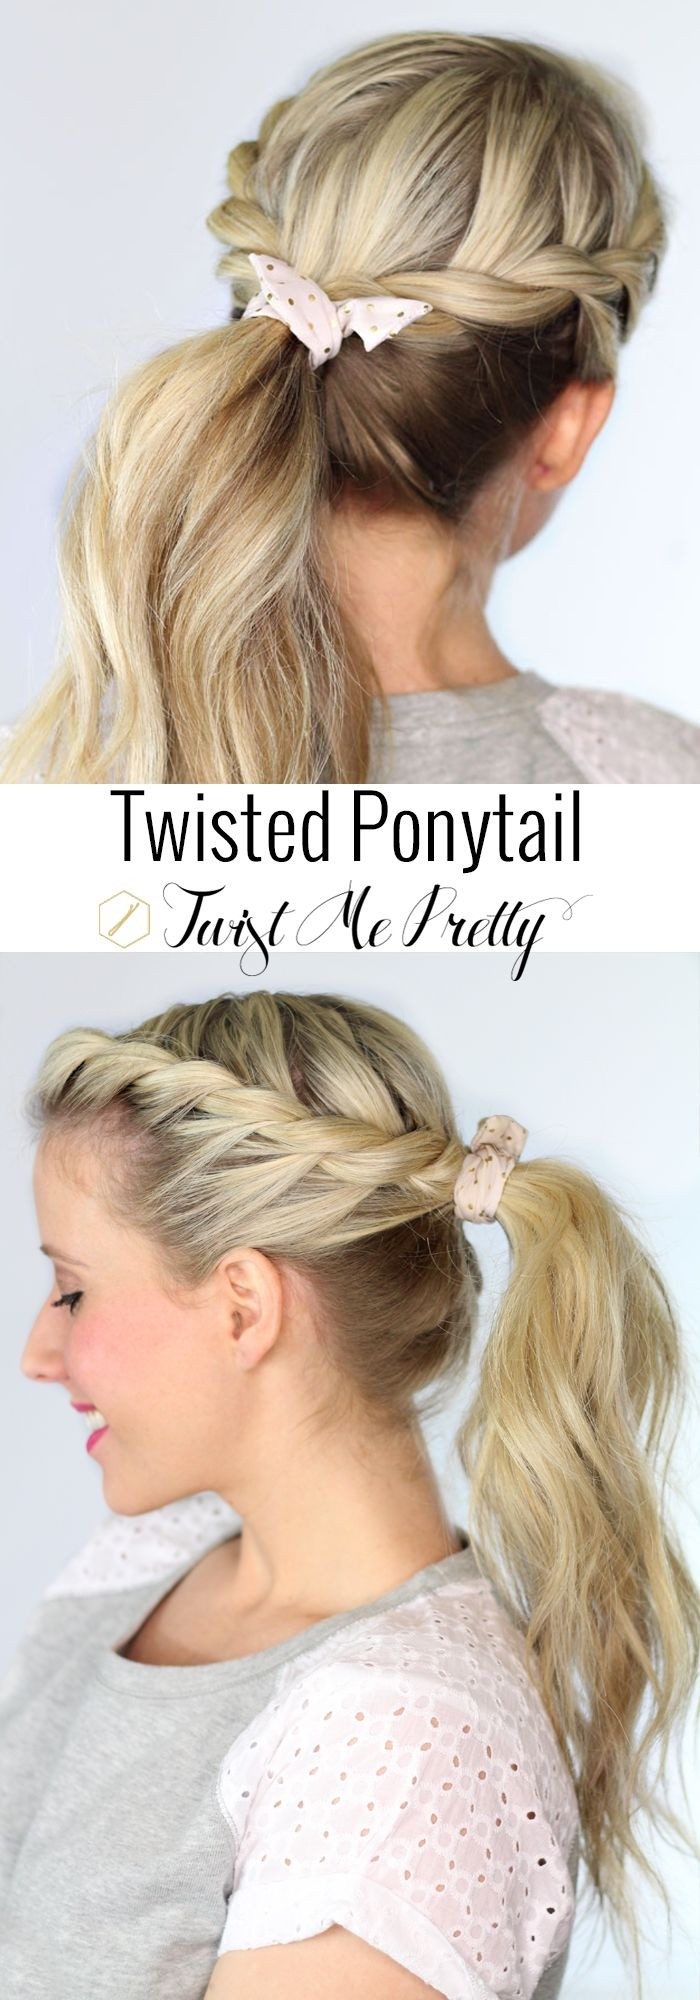 Top 10 Fashionable Ponytail Hairstyles For Summer 2018